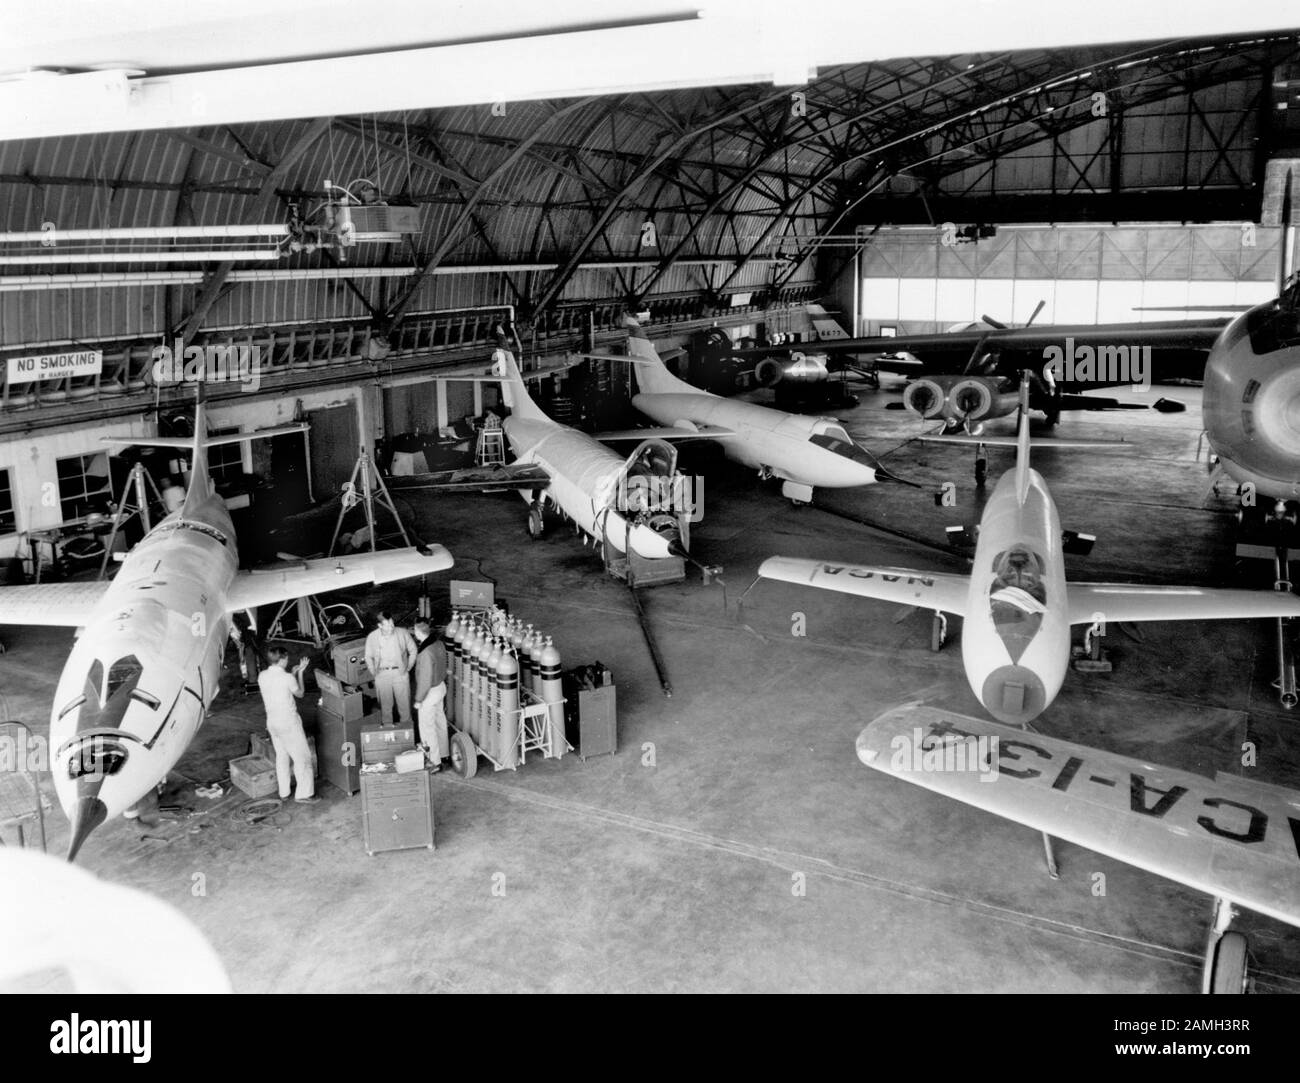 NACA Aircraft at a hangar at the South Base of Edwards Air Force Base: three D-558-2s, D-558-1 and a B-47, with the X-4 and F-51 in the background, Kern County, California, United States, 1953. Image courtesy NASA. () Stock Photo